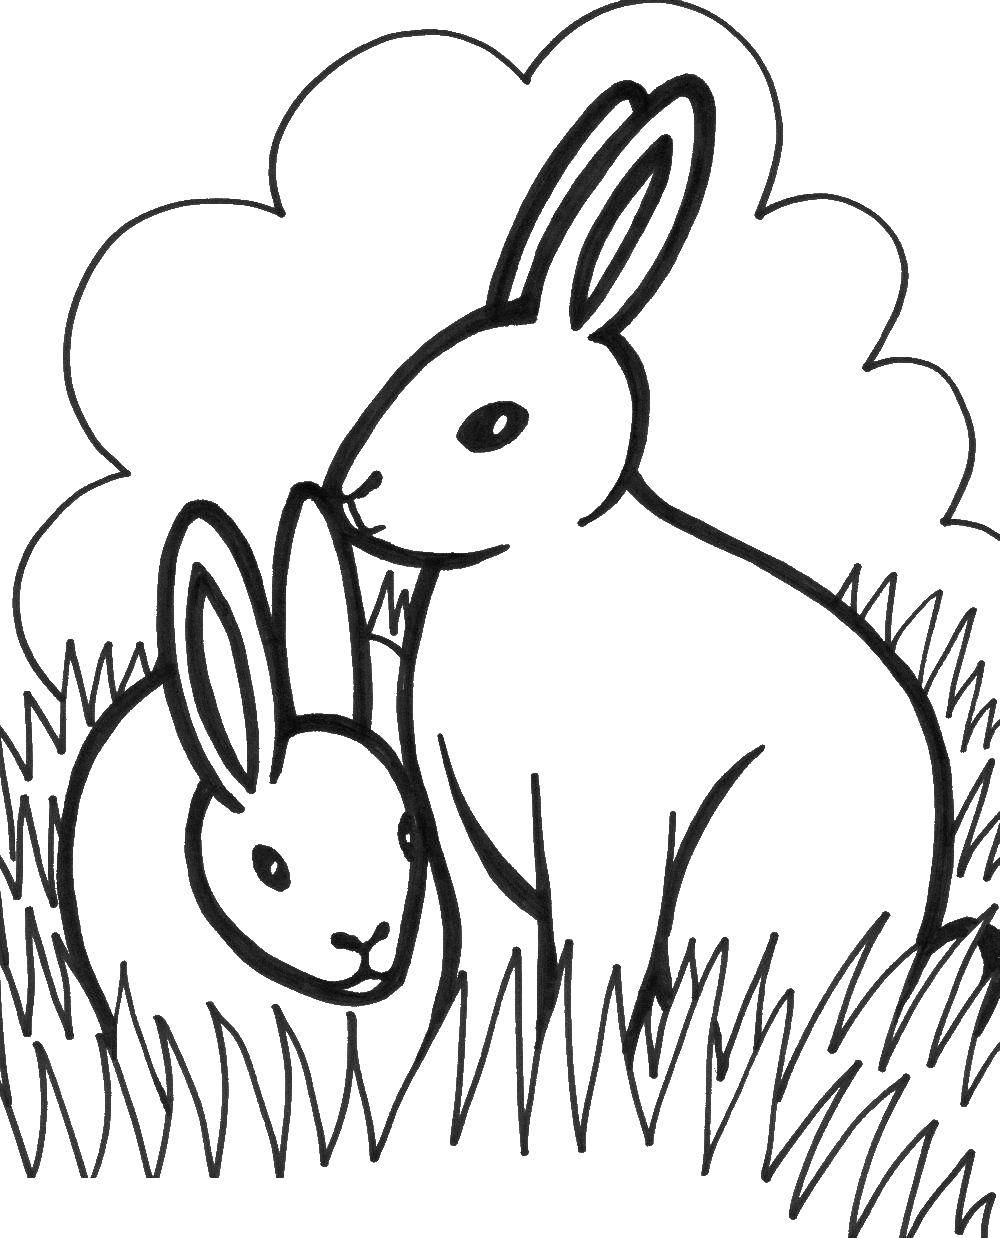 Coloring Two rabbits in the grass. Category animals. Tags:  animals, rabbits.